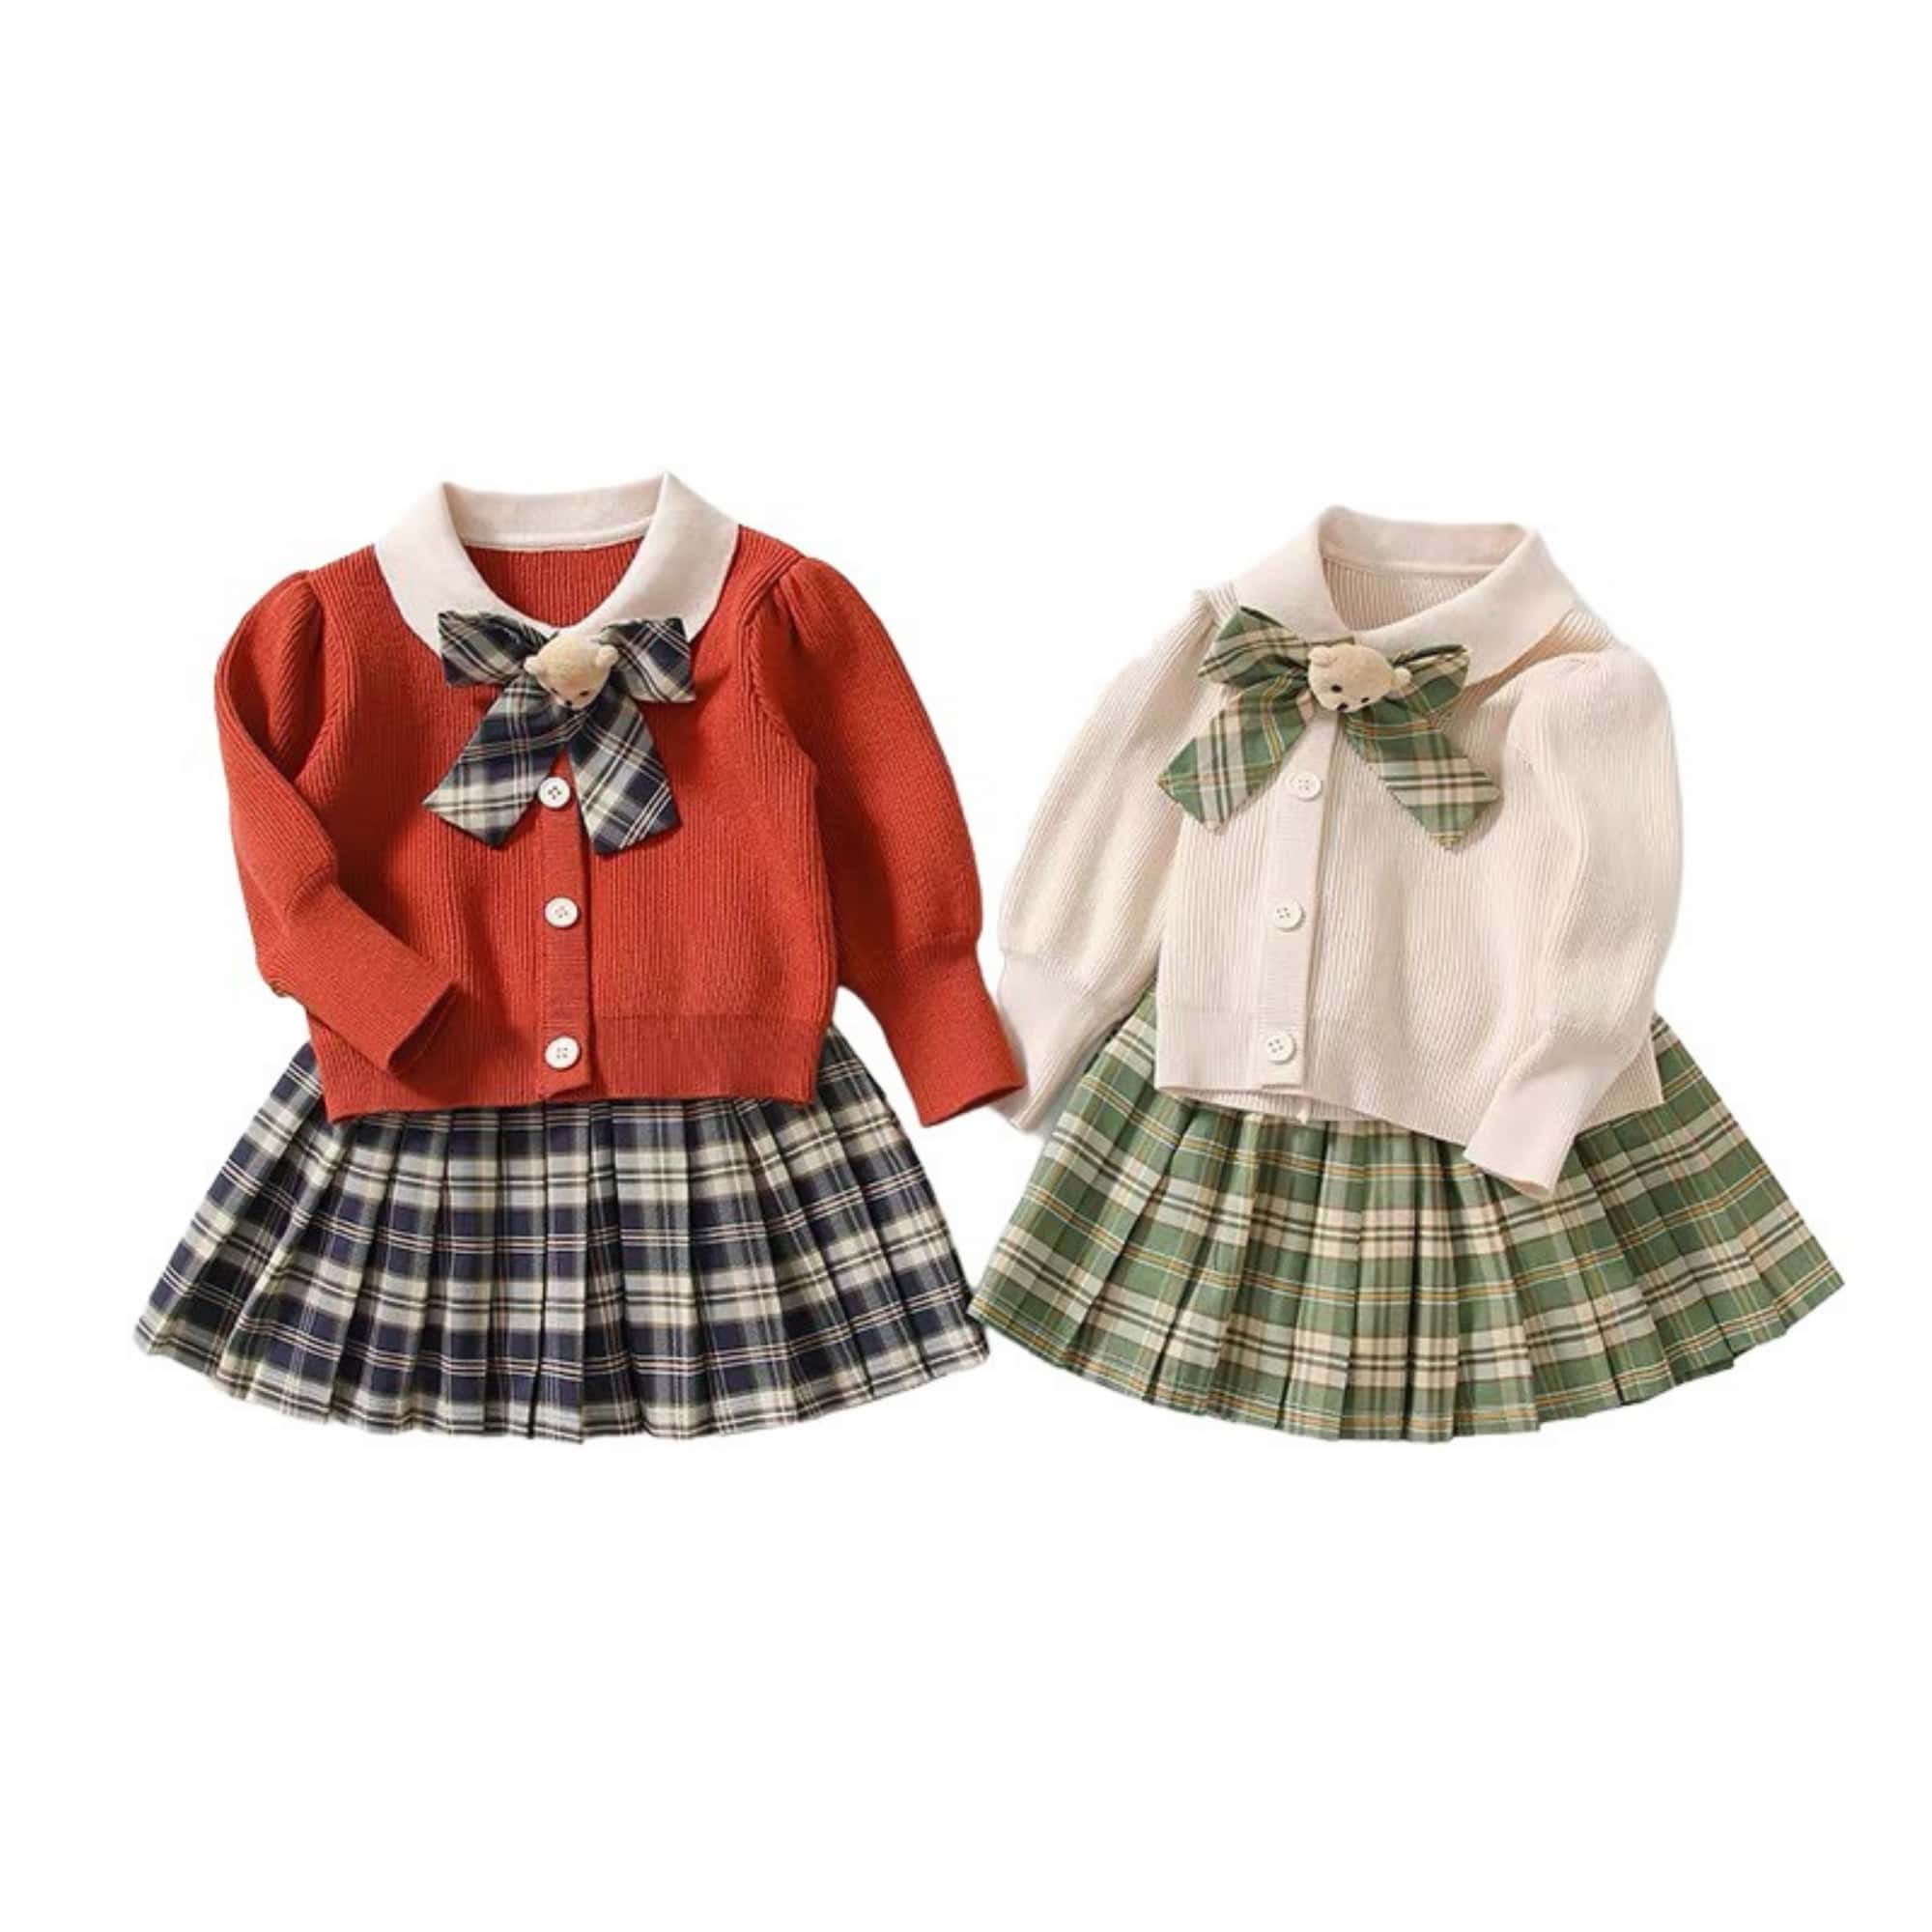 Kids Clothes Girls Customized Service 100% Wool Dresses New Arrival Each One In Opp Bag Made In Vietnam Manufacturer 2